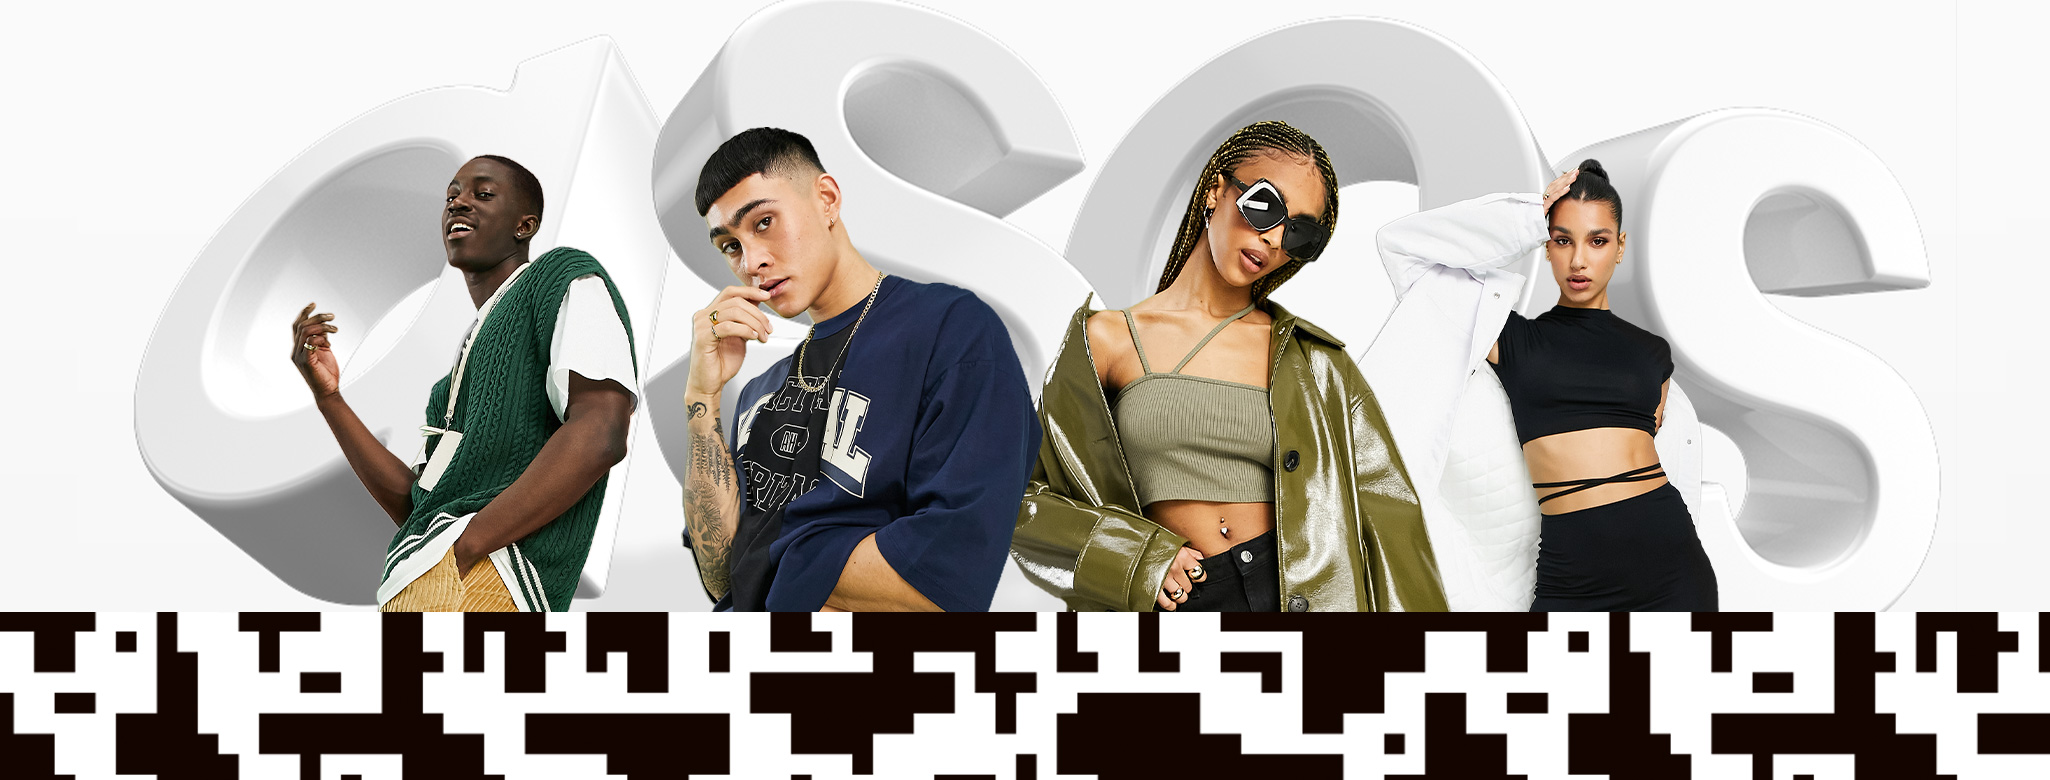 ASOS up to 70% OFF big brands plus extra 20% OFF with promo code